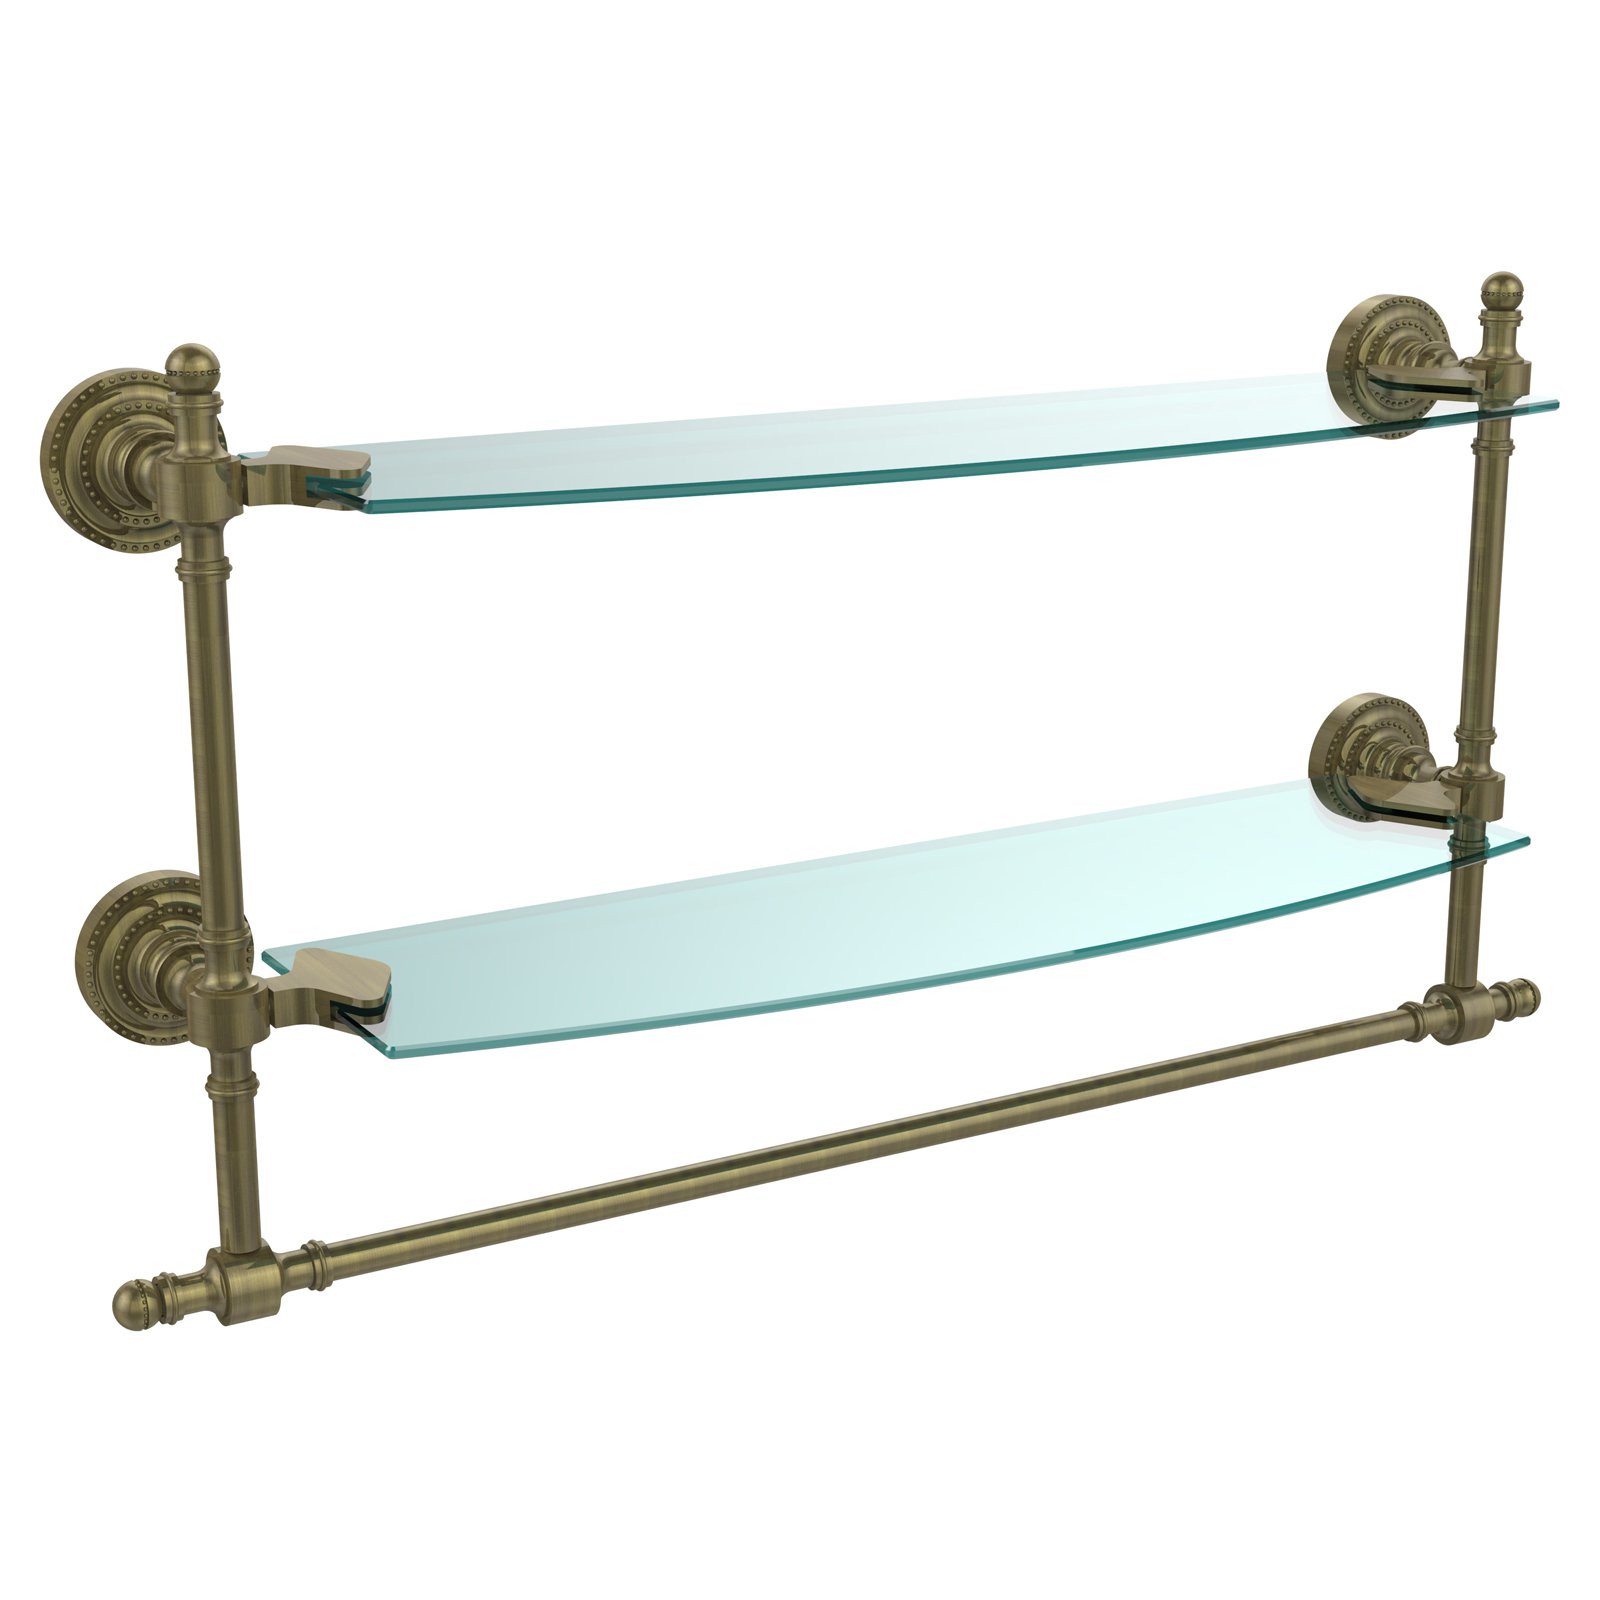 Retro Dot 24'' Two Tiered Glass Shelf with Towel Bar in Satin Nickel - image 2 of 2